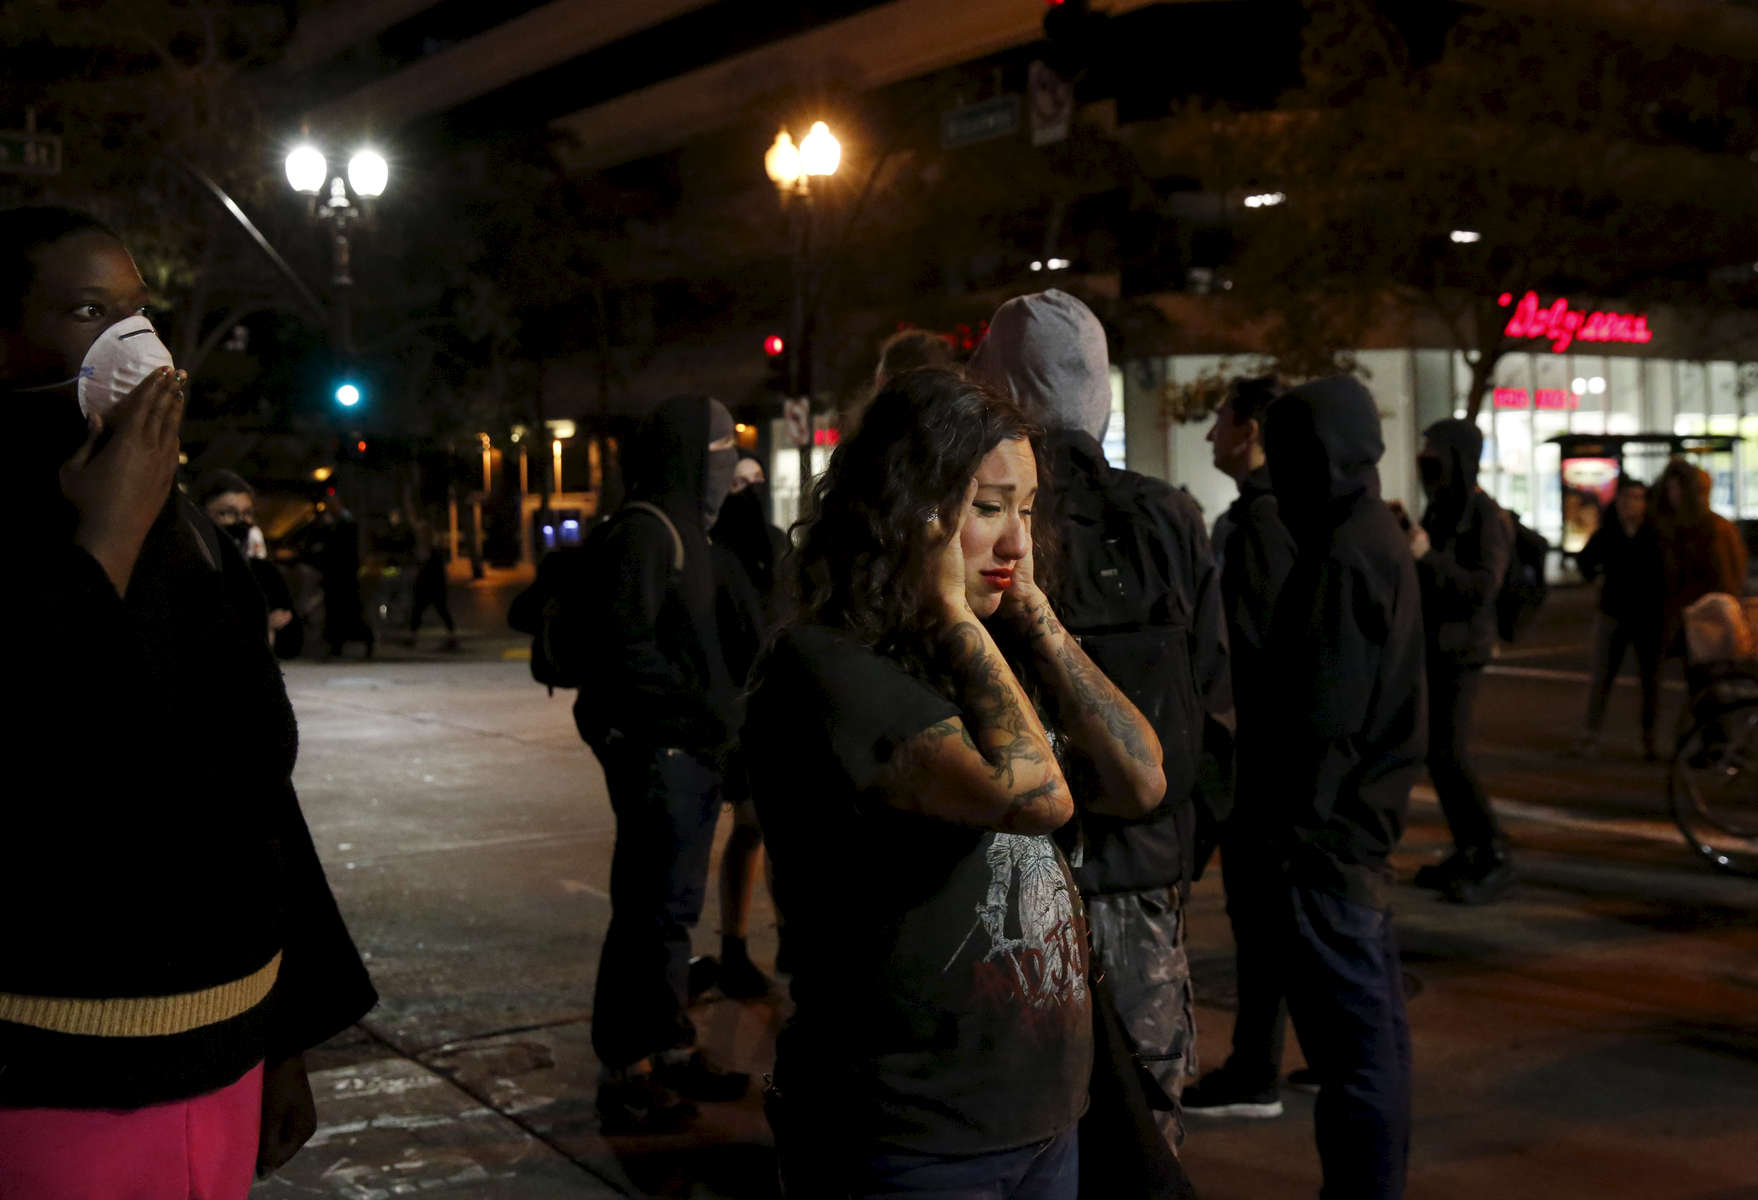 A woman breaks down in tears during an anti-Trump protest Nov. 8, 2016 in Oakland, Calif., after the announcement that Republican presidential candidate Donald J. Trump won the presidential election.